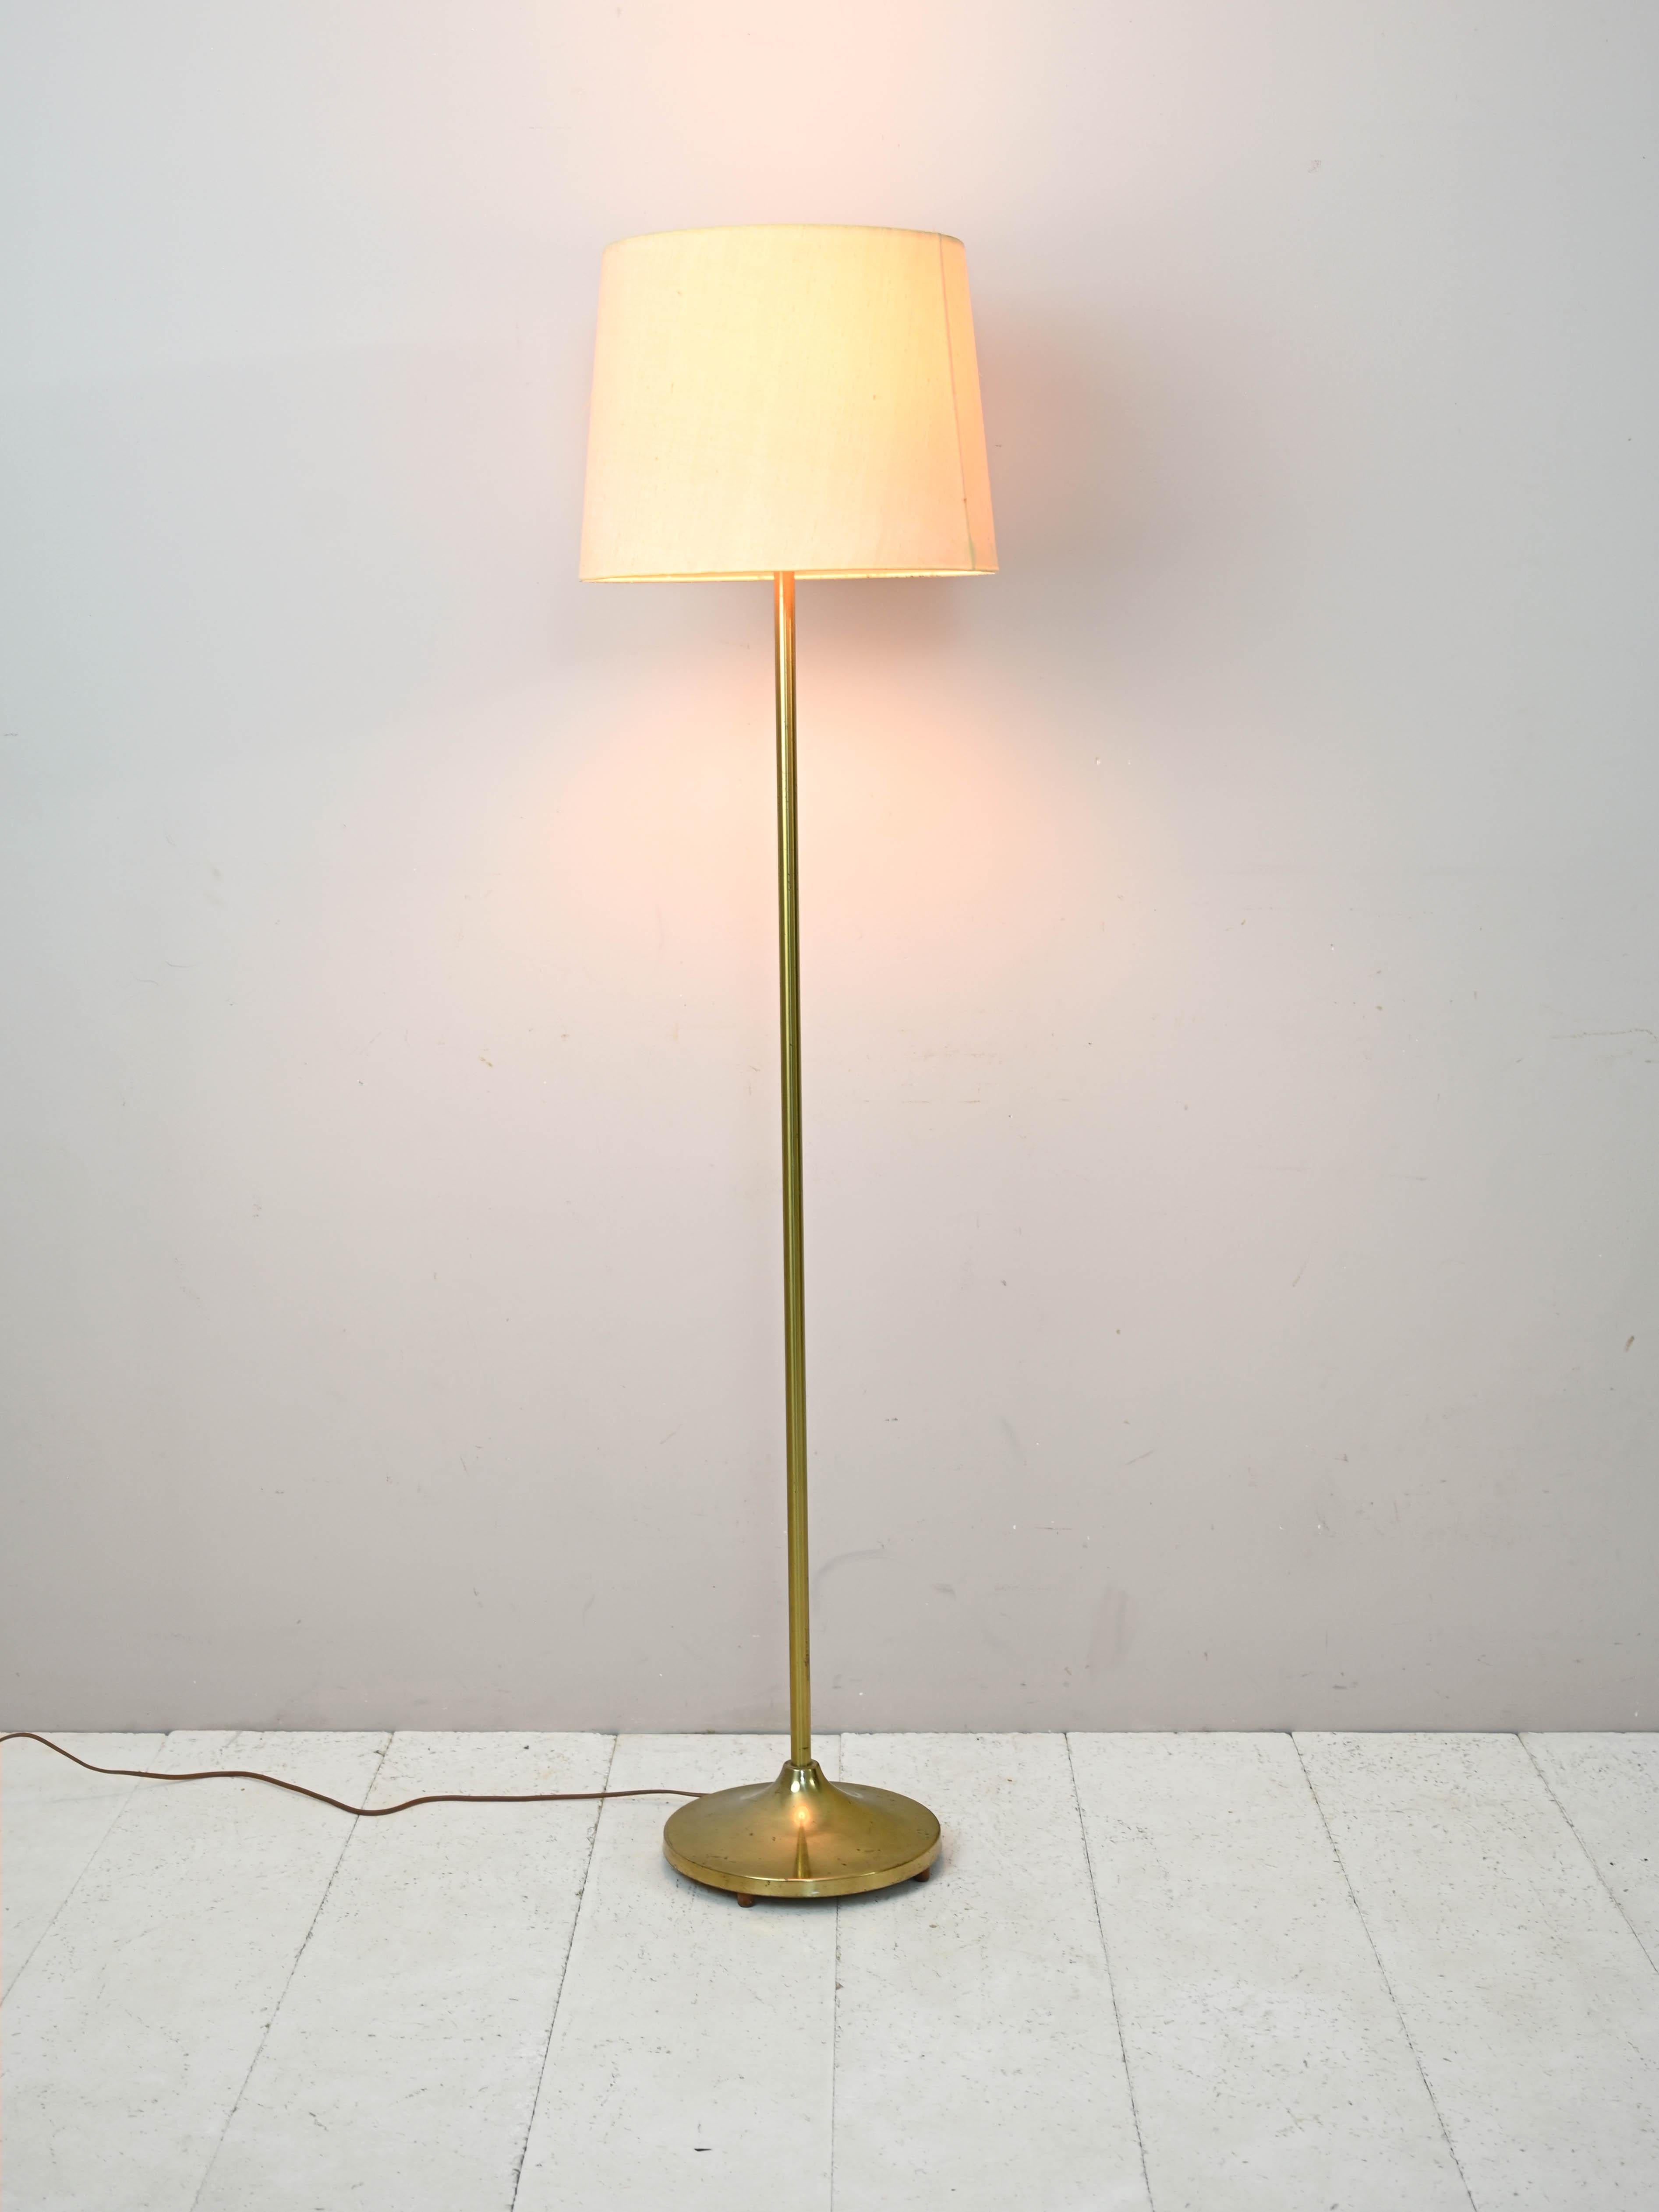 1960s floor lamp with fabric shade.

This classically styled addition features a gilded metal frame and a cylindrical fabric shade.
Ideal for adding a retro touch to a contemporary styled room.

Good condition. May show some signs of aging.